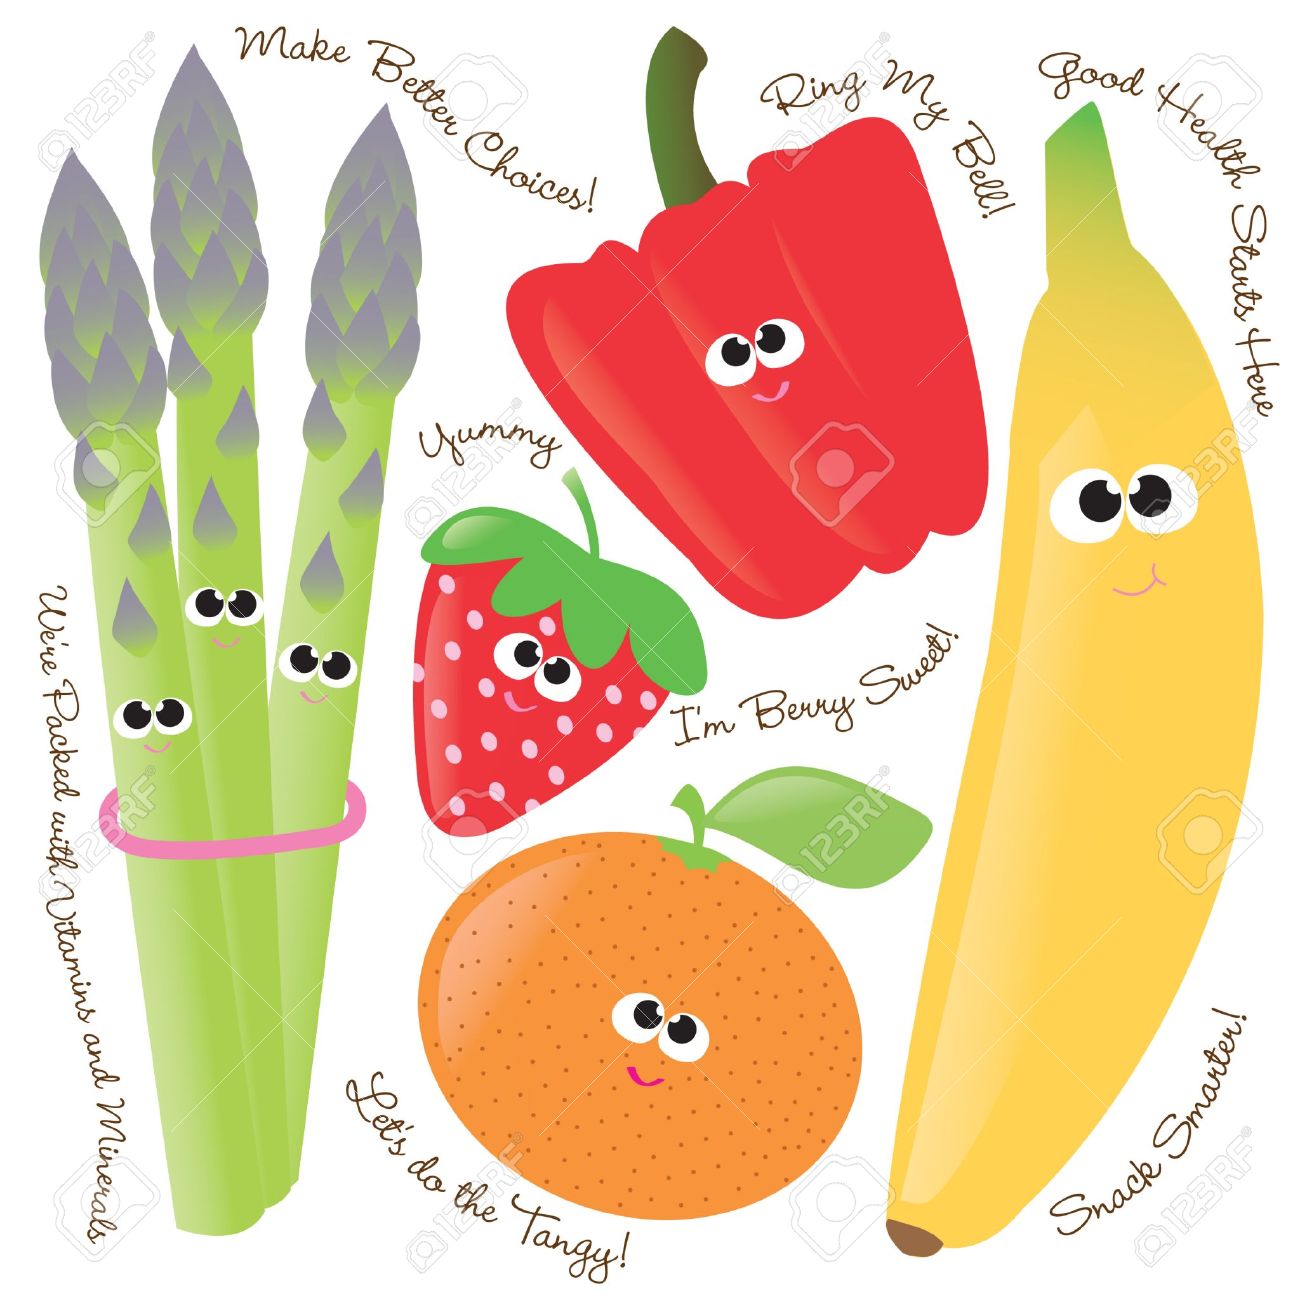 Healthy snacks clipart clipartfest